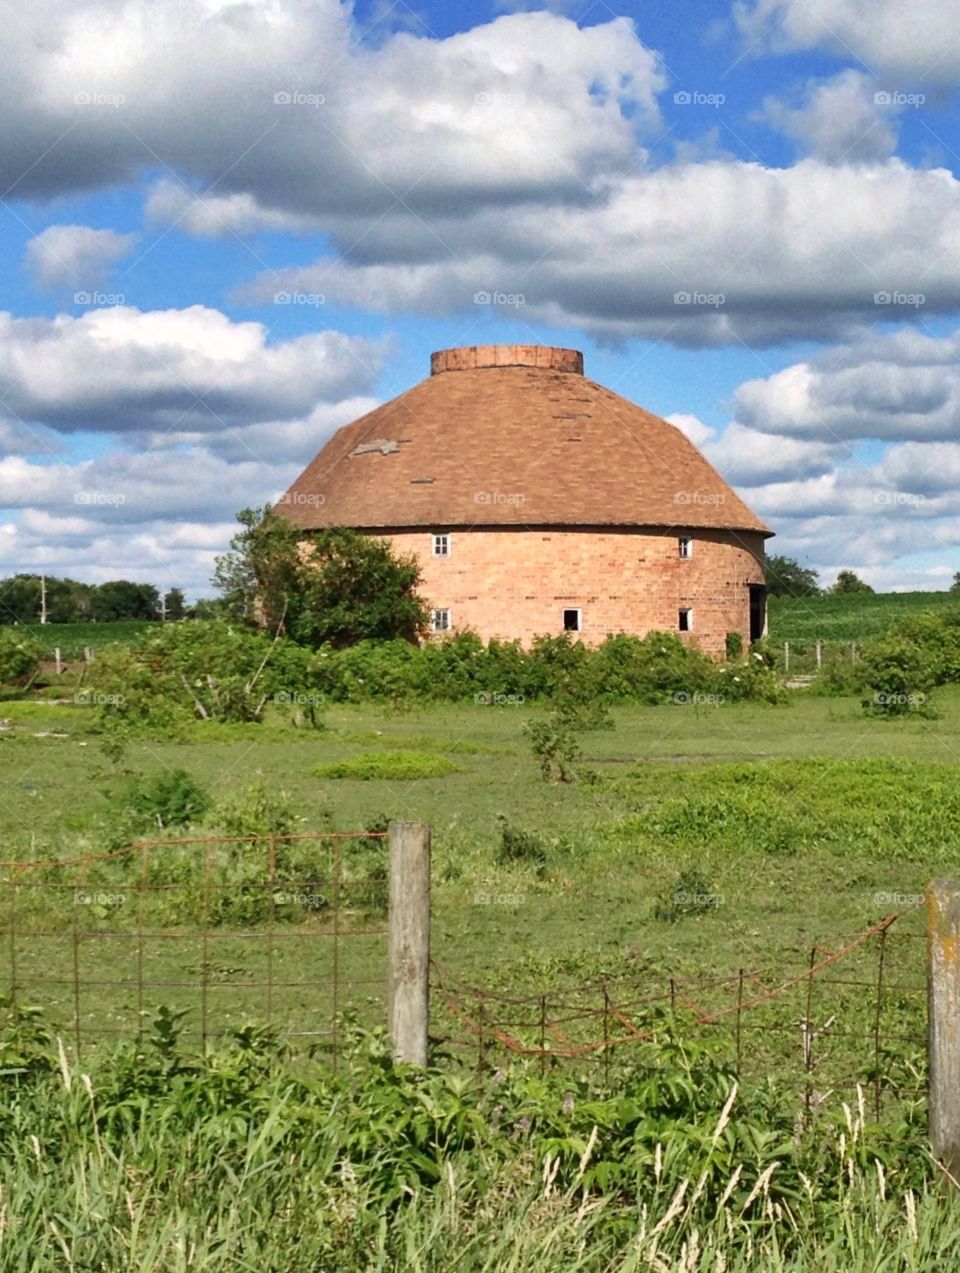 John W. Young Round Barn - Posted to the National Register of Historic Places